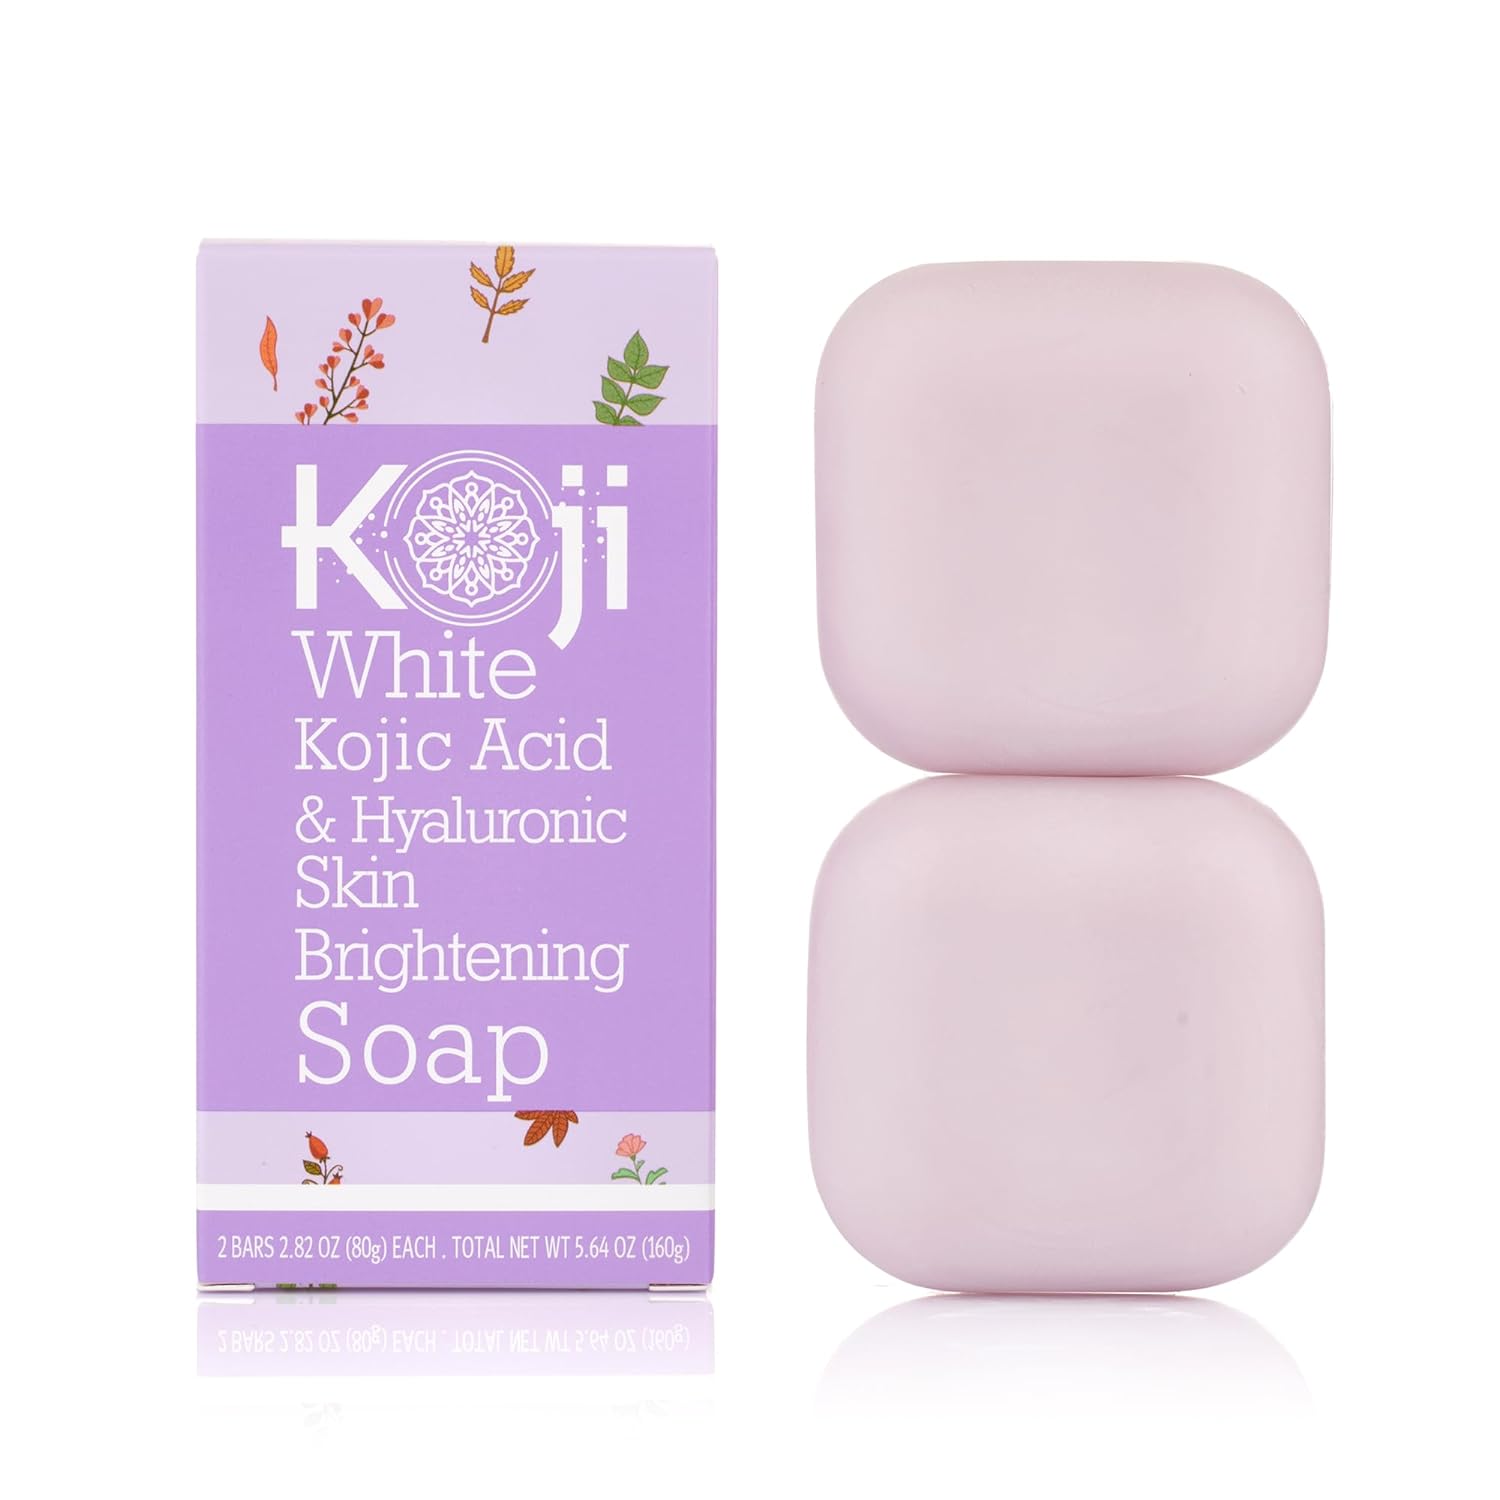 Koji White Kojic Acid & Hyaluronic Acid Skin Brightening Soap for Hydrating, Face Moisturizer, Dark Spots, Anti-Aging, Reduces the Appearance of Wrinkles with Vitamin E, Vegan Soap 2.82  (2 Bars)